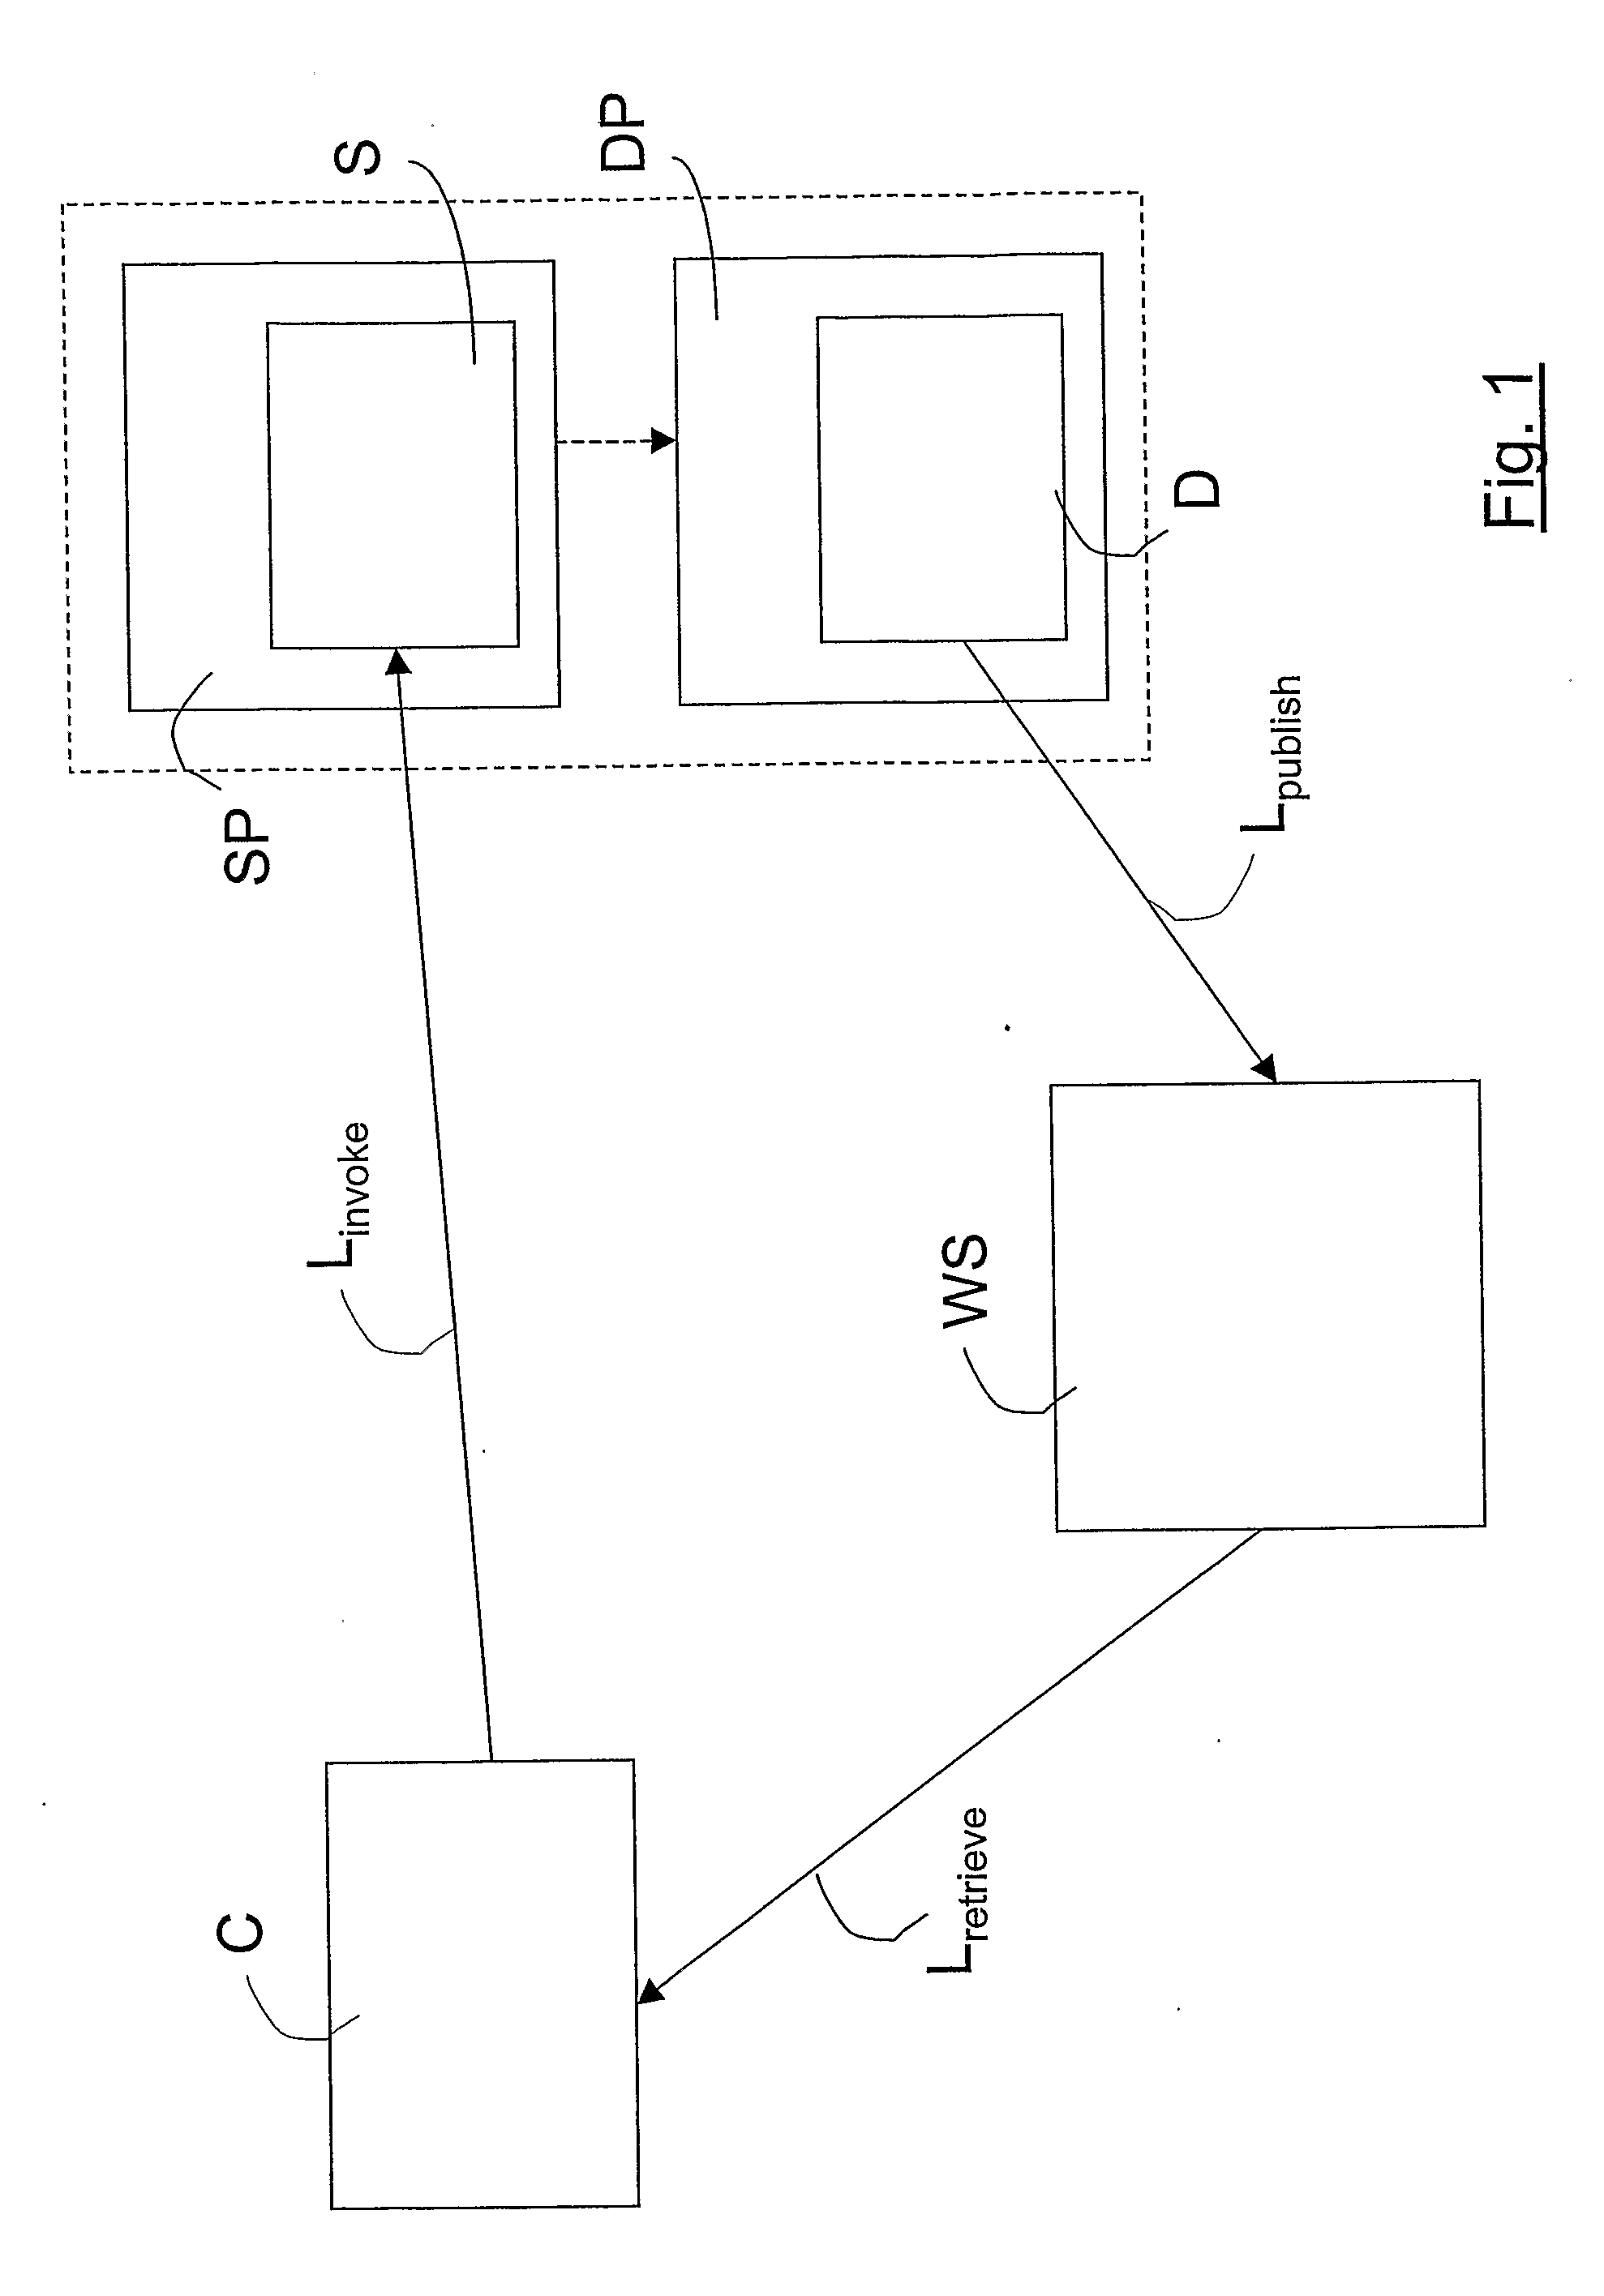 Method and System of Interaction Between Entities on a Communication Network